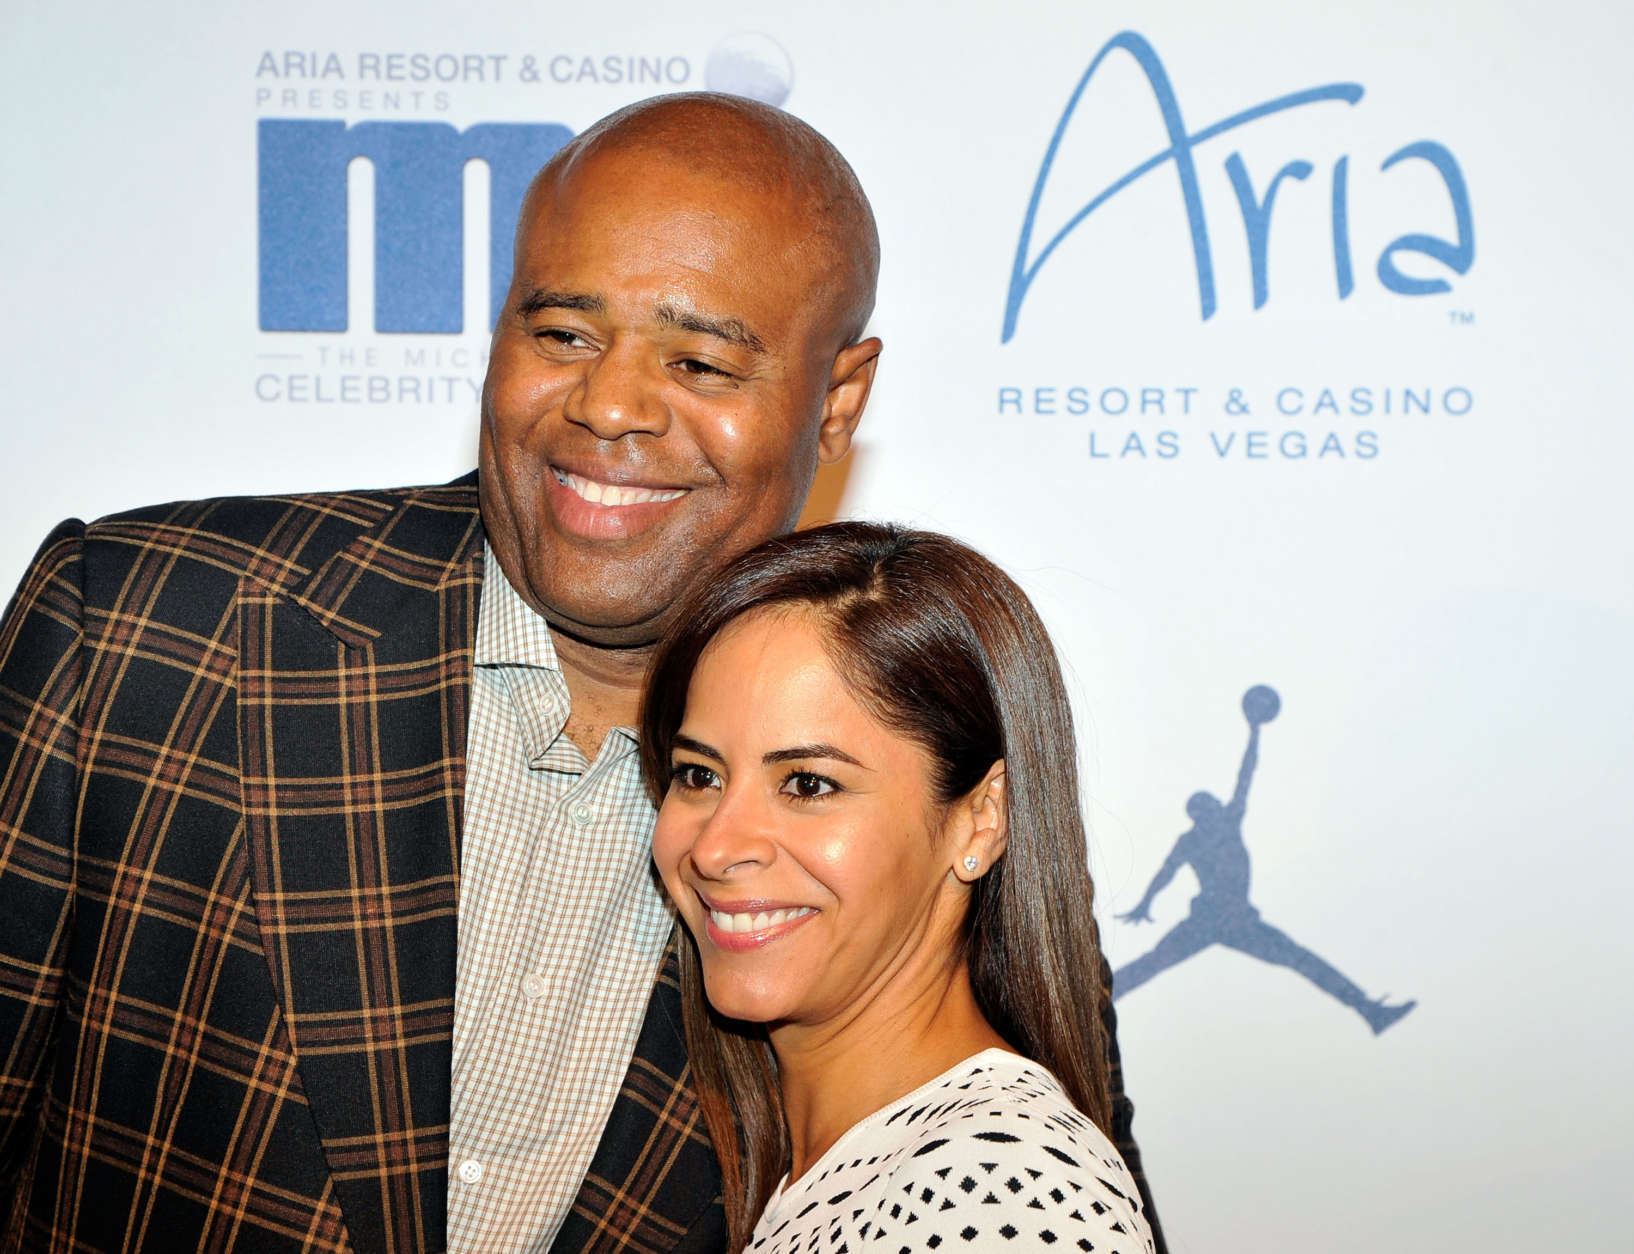 From left, actor Chi McBride and wife Julissa arrive at the Michael Jordan Celebrity Invitational opening night dinner, Wednesday, April, 3, 2013 in Las Vegas. (Photo by Jeff Bottari/Invision for Jordan/AP Images)